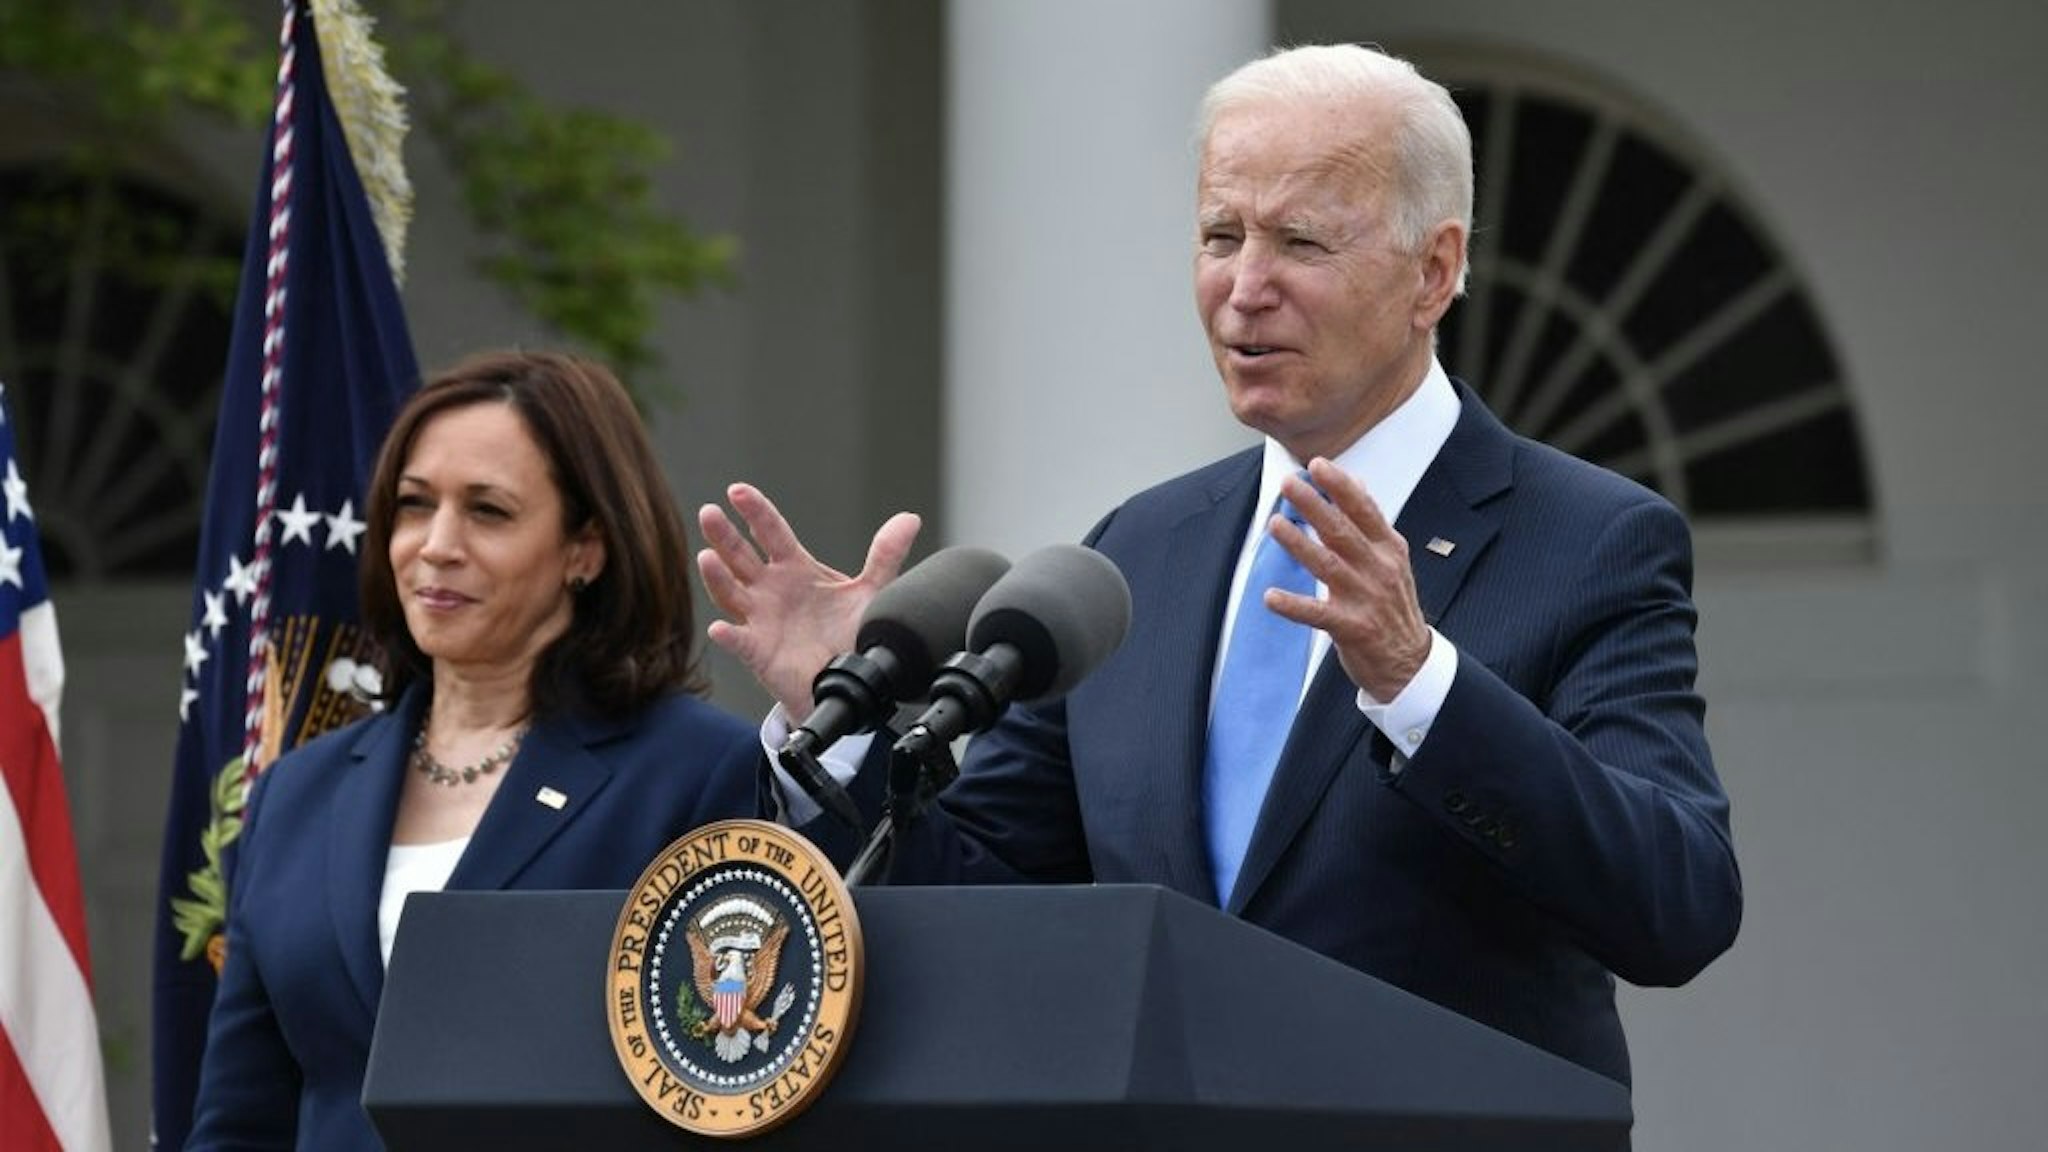 US Vice President Kamala Harris looks on as US President Joe Biden delivers remarks on Covid-19 response and the vaccination program, from the Rose Garden of the White House, Washington, DC on May 13, 2021. (Photo by Nicholas Kamm / AFP) (Photo by NICHOLAS KAMM/AFP via Getty Images)